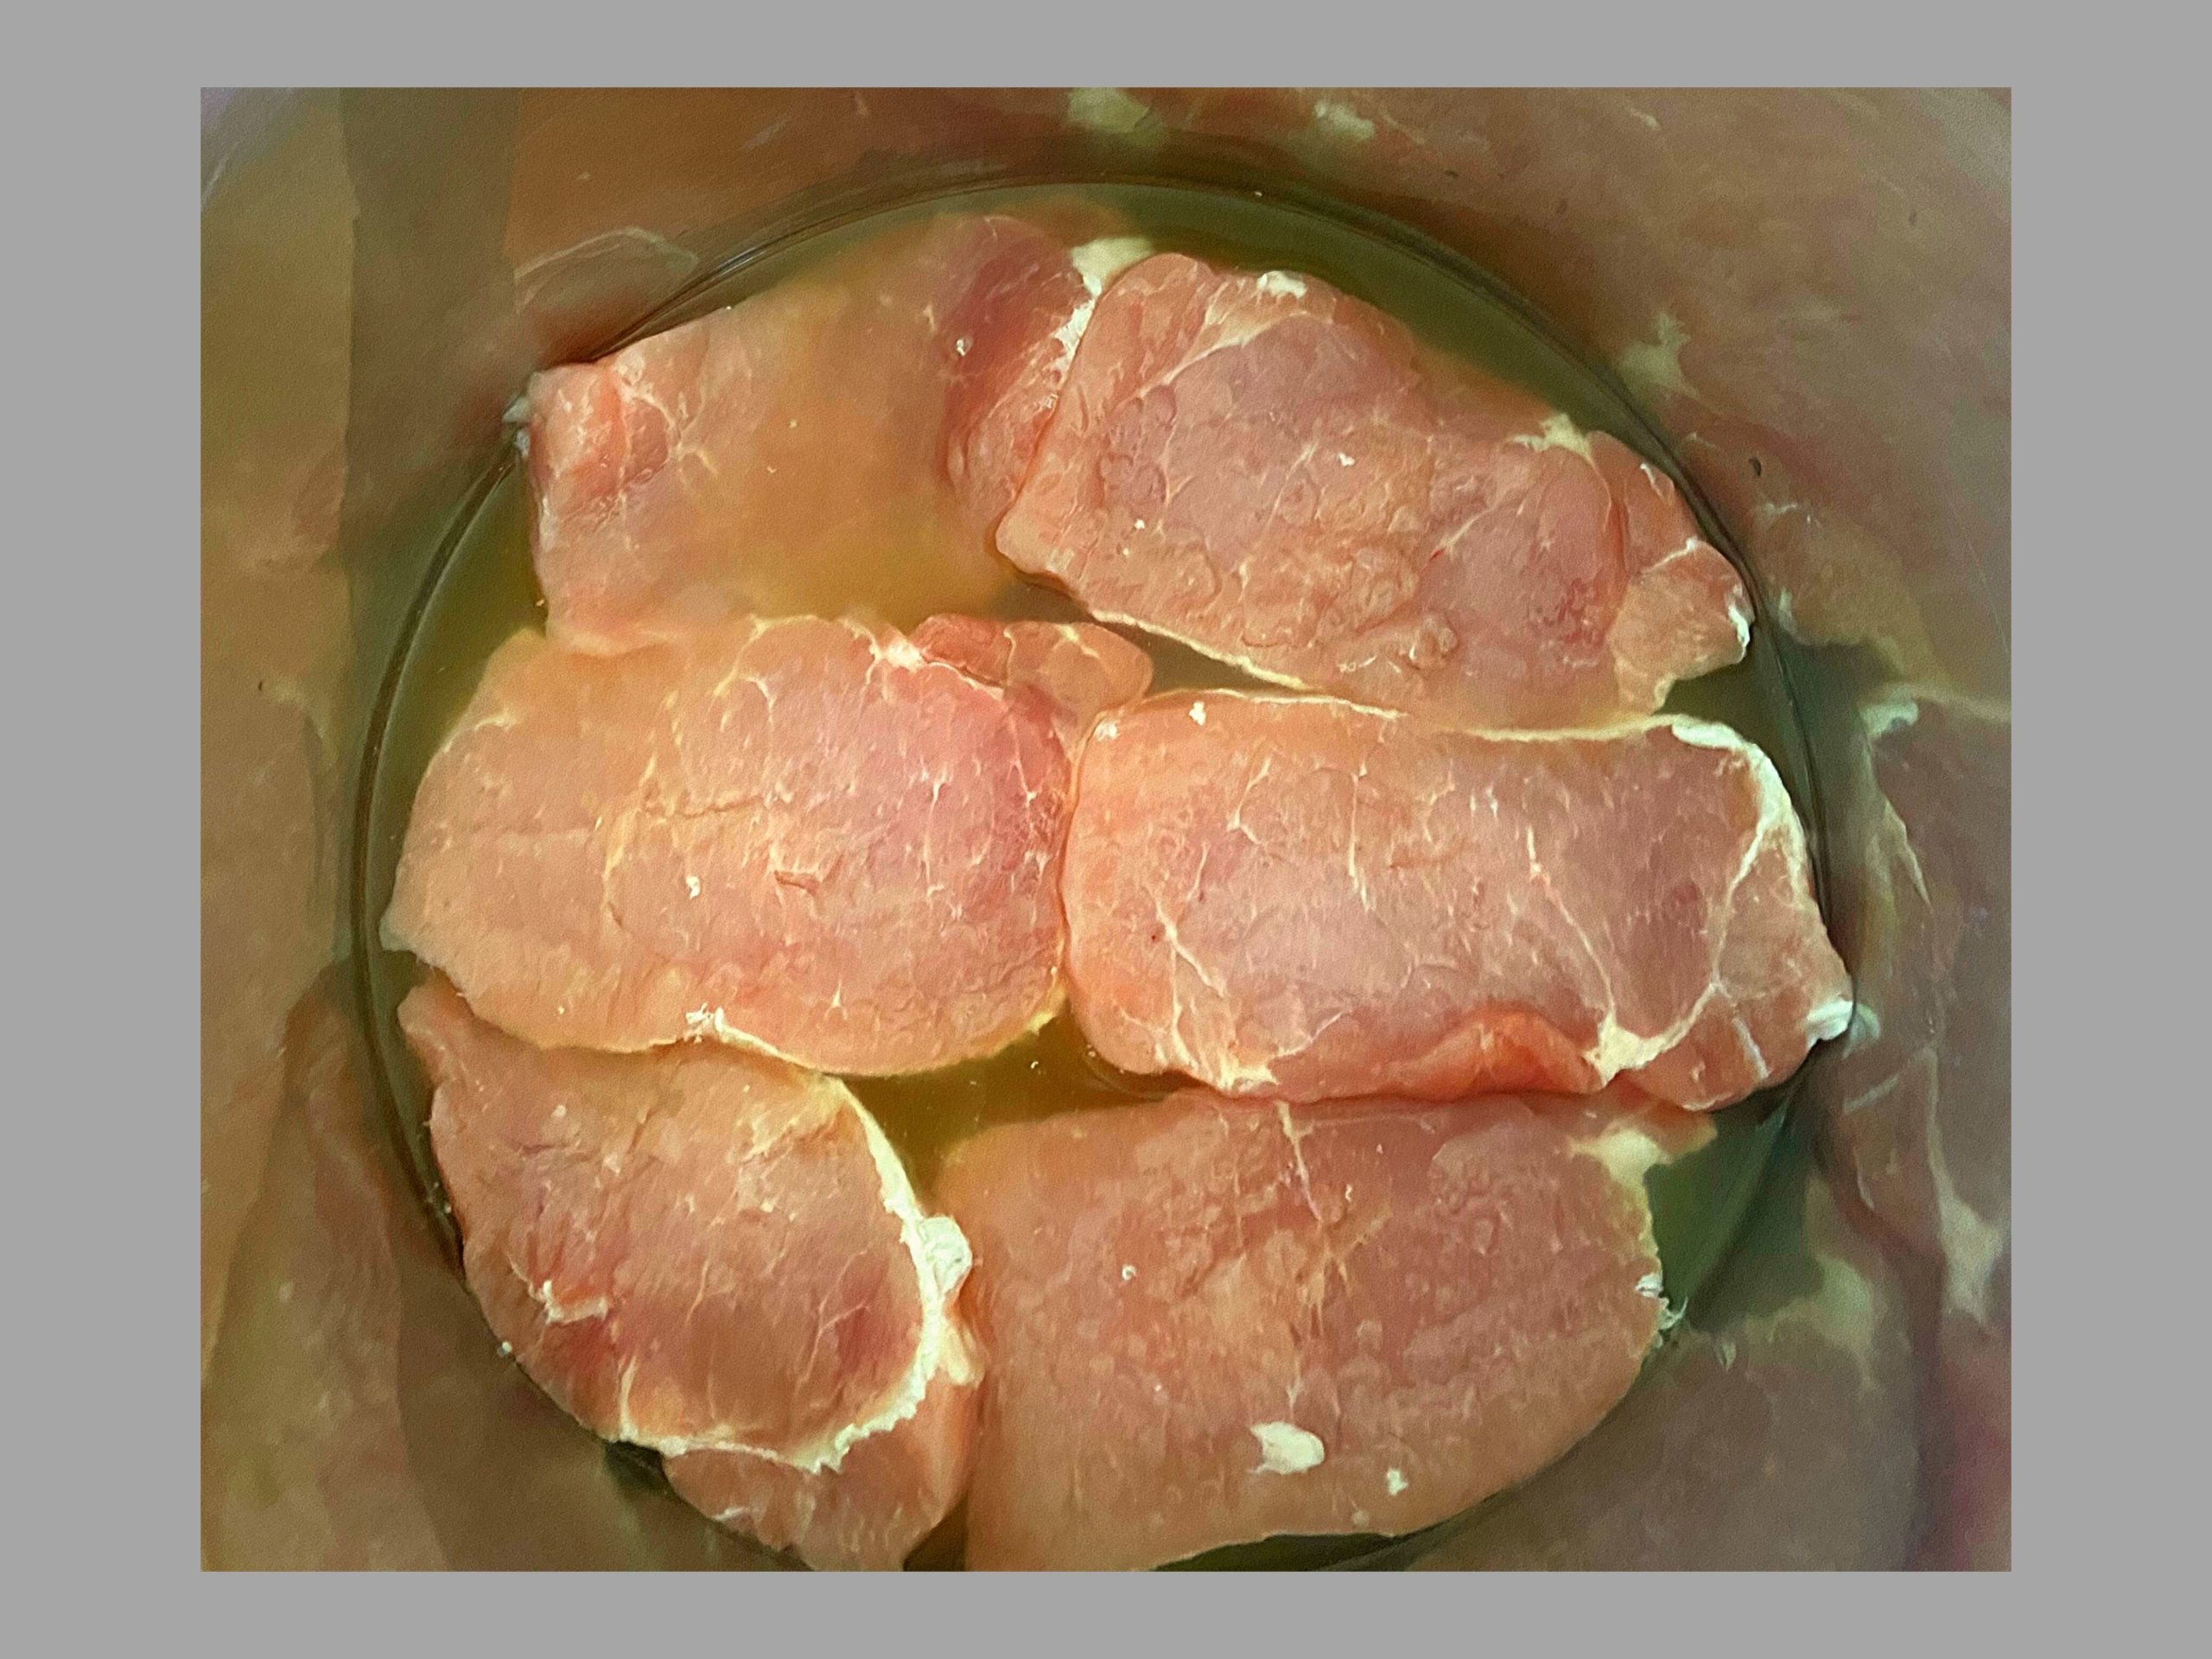 Raw 1" sliced pork roast in an instant pot with 1 cup of chicken broth